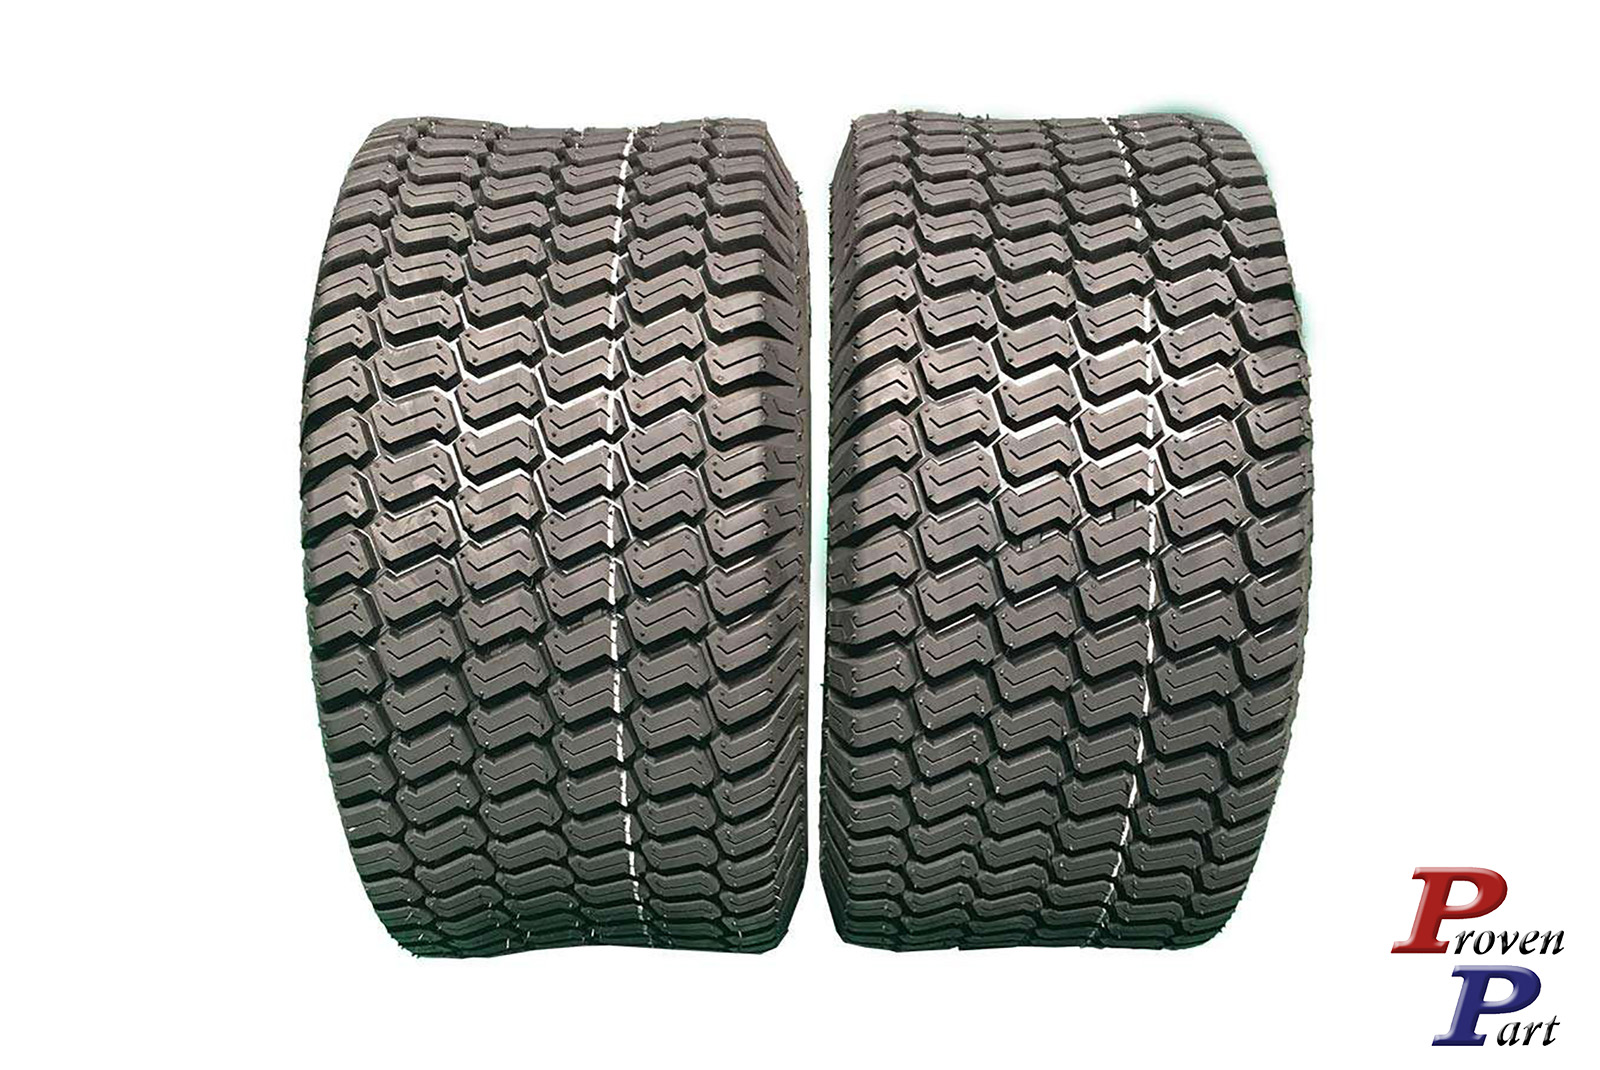 Set of 2 riding mower tubeless 4 ply tires 18x9.50-8